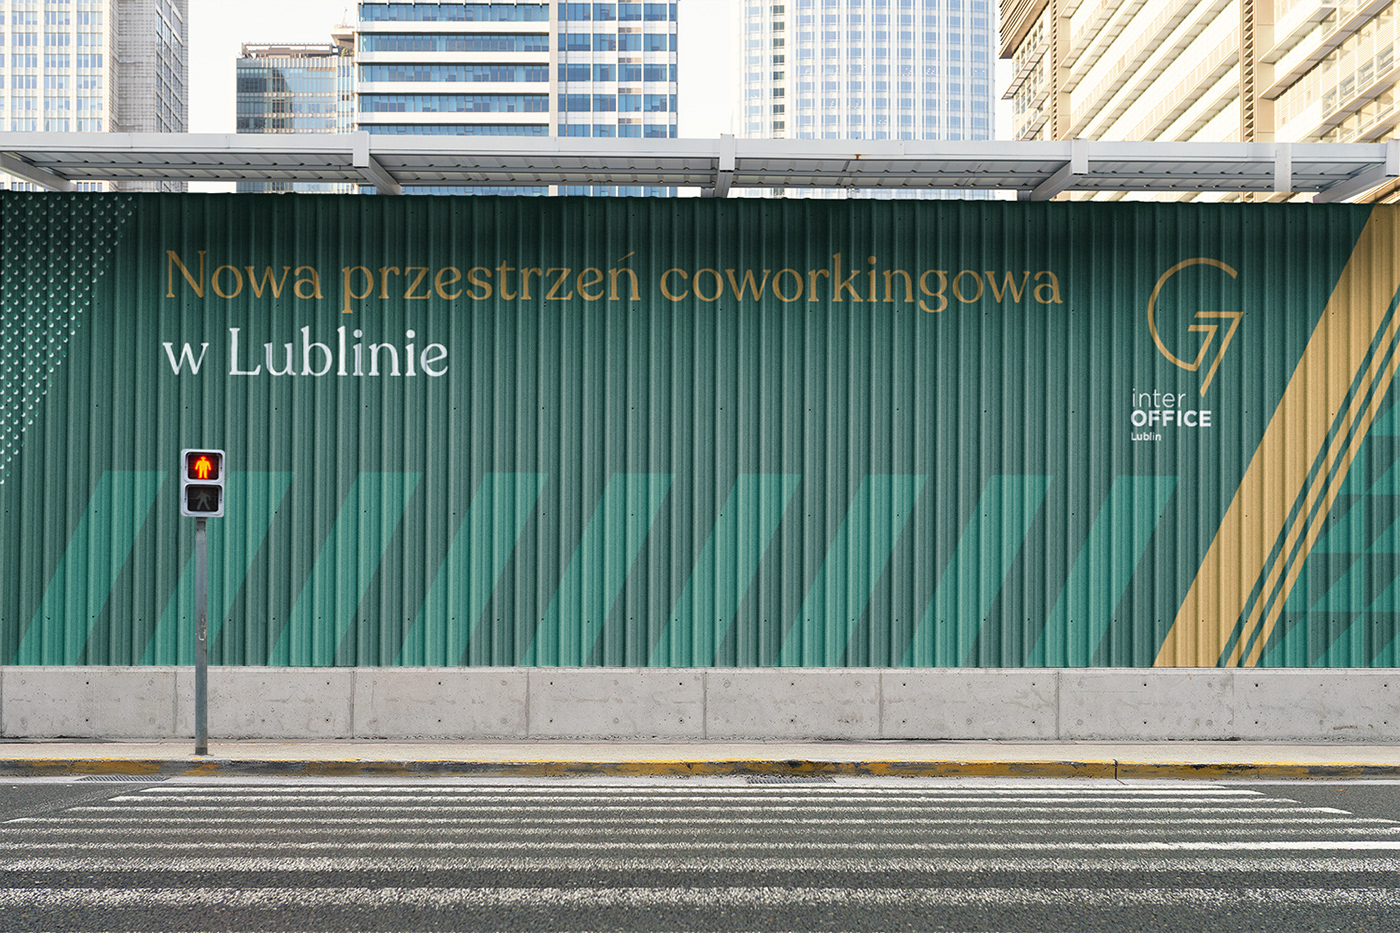 Hoarding covering a construction site featuring green and golden graphics.